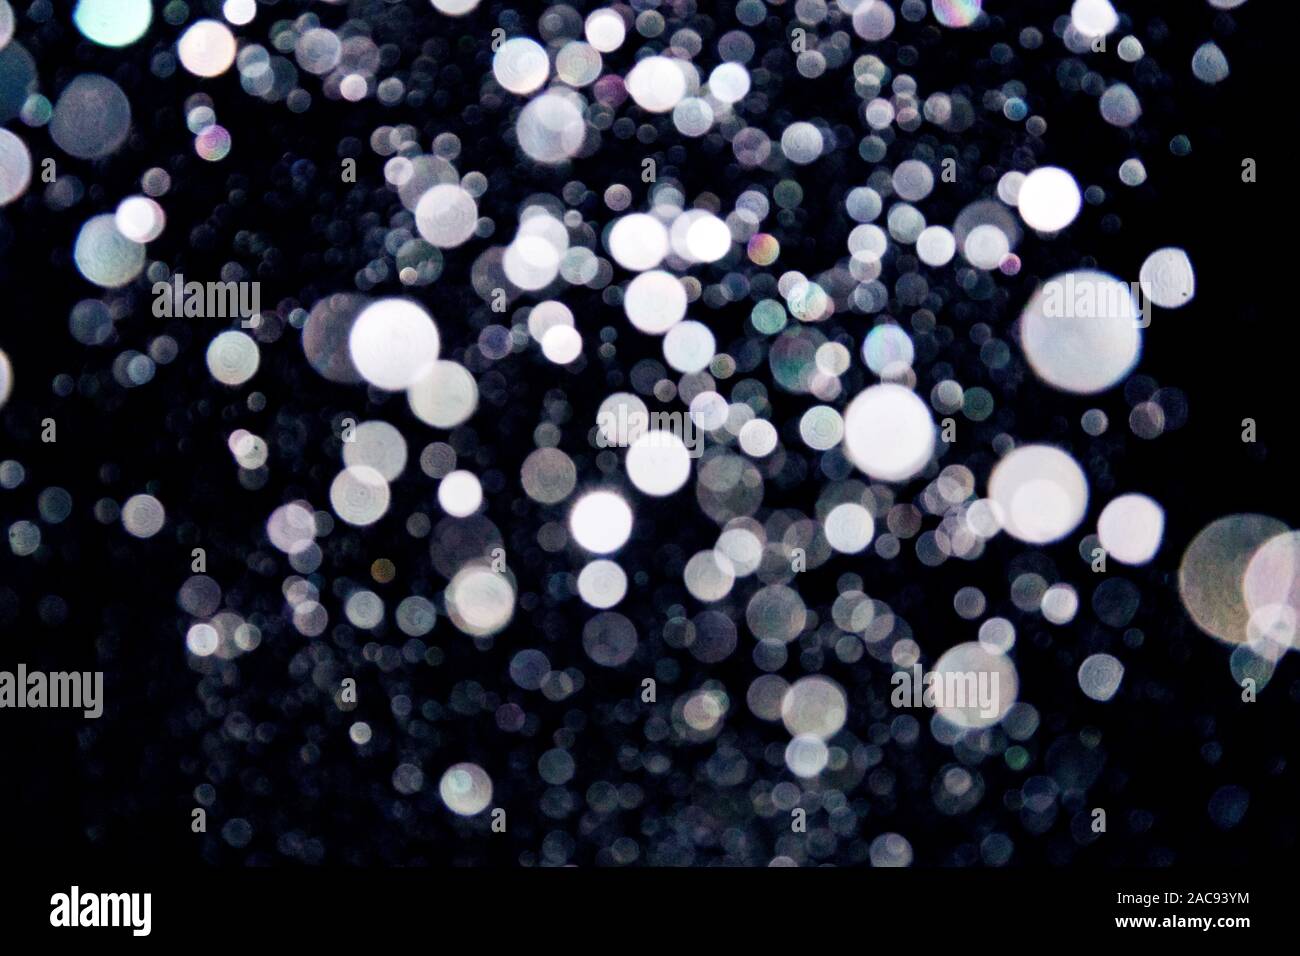 Sparkle Filter High Resolution Stock Photography and Images - Alamy